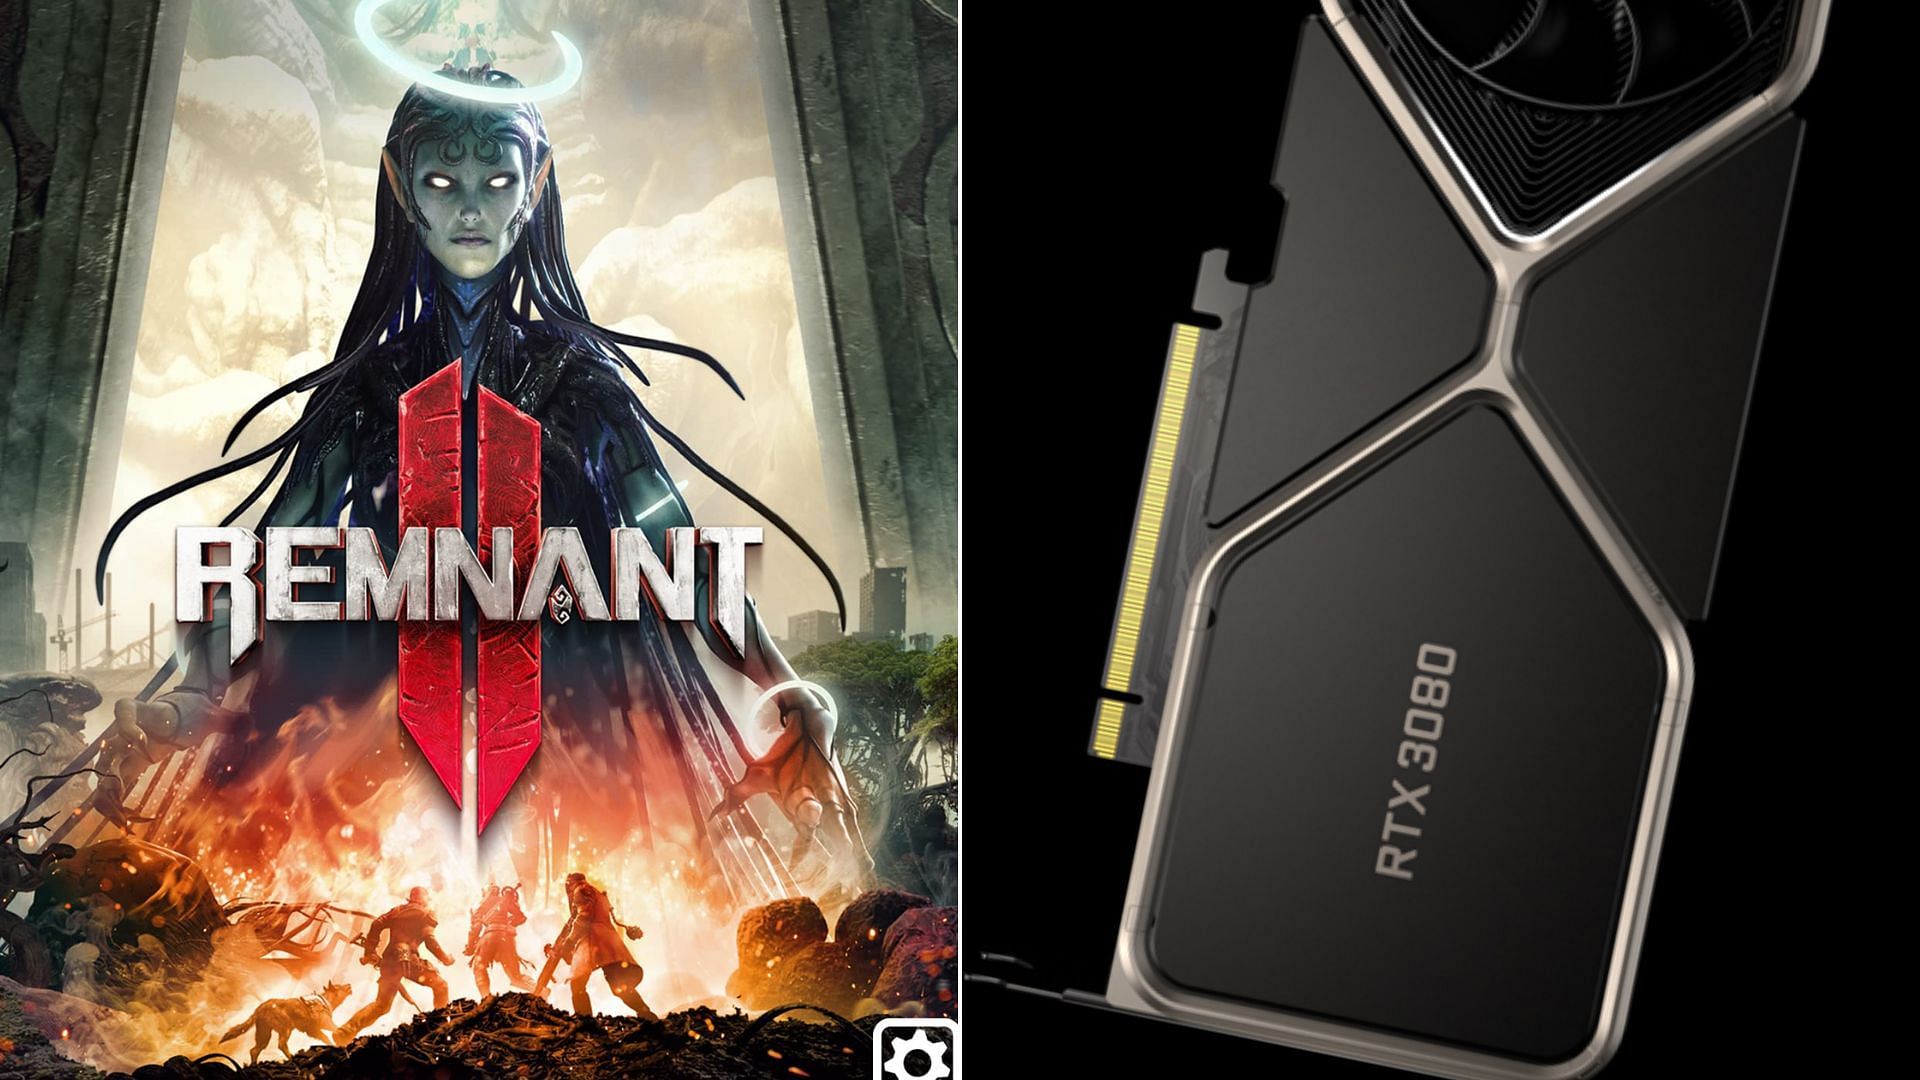 The RTX 3080 and 3080 Ti are superb cards for playing Remnant 2 (Image via Gearbox and Nvidia)